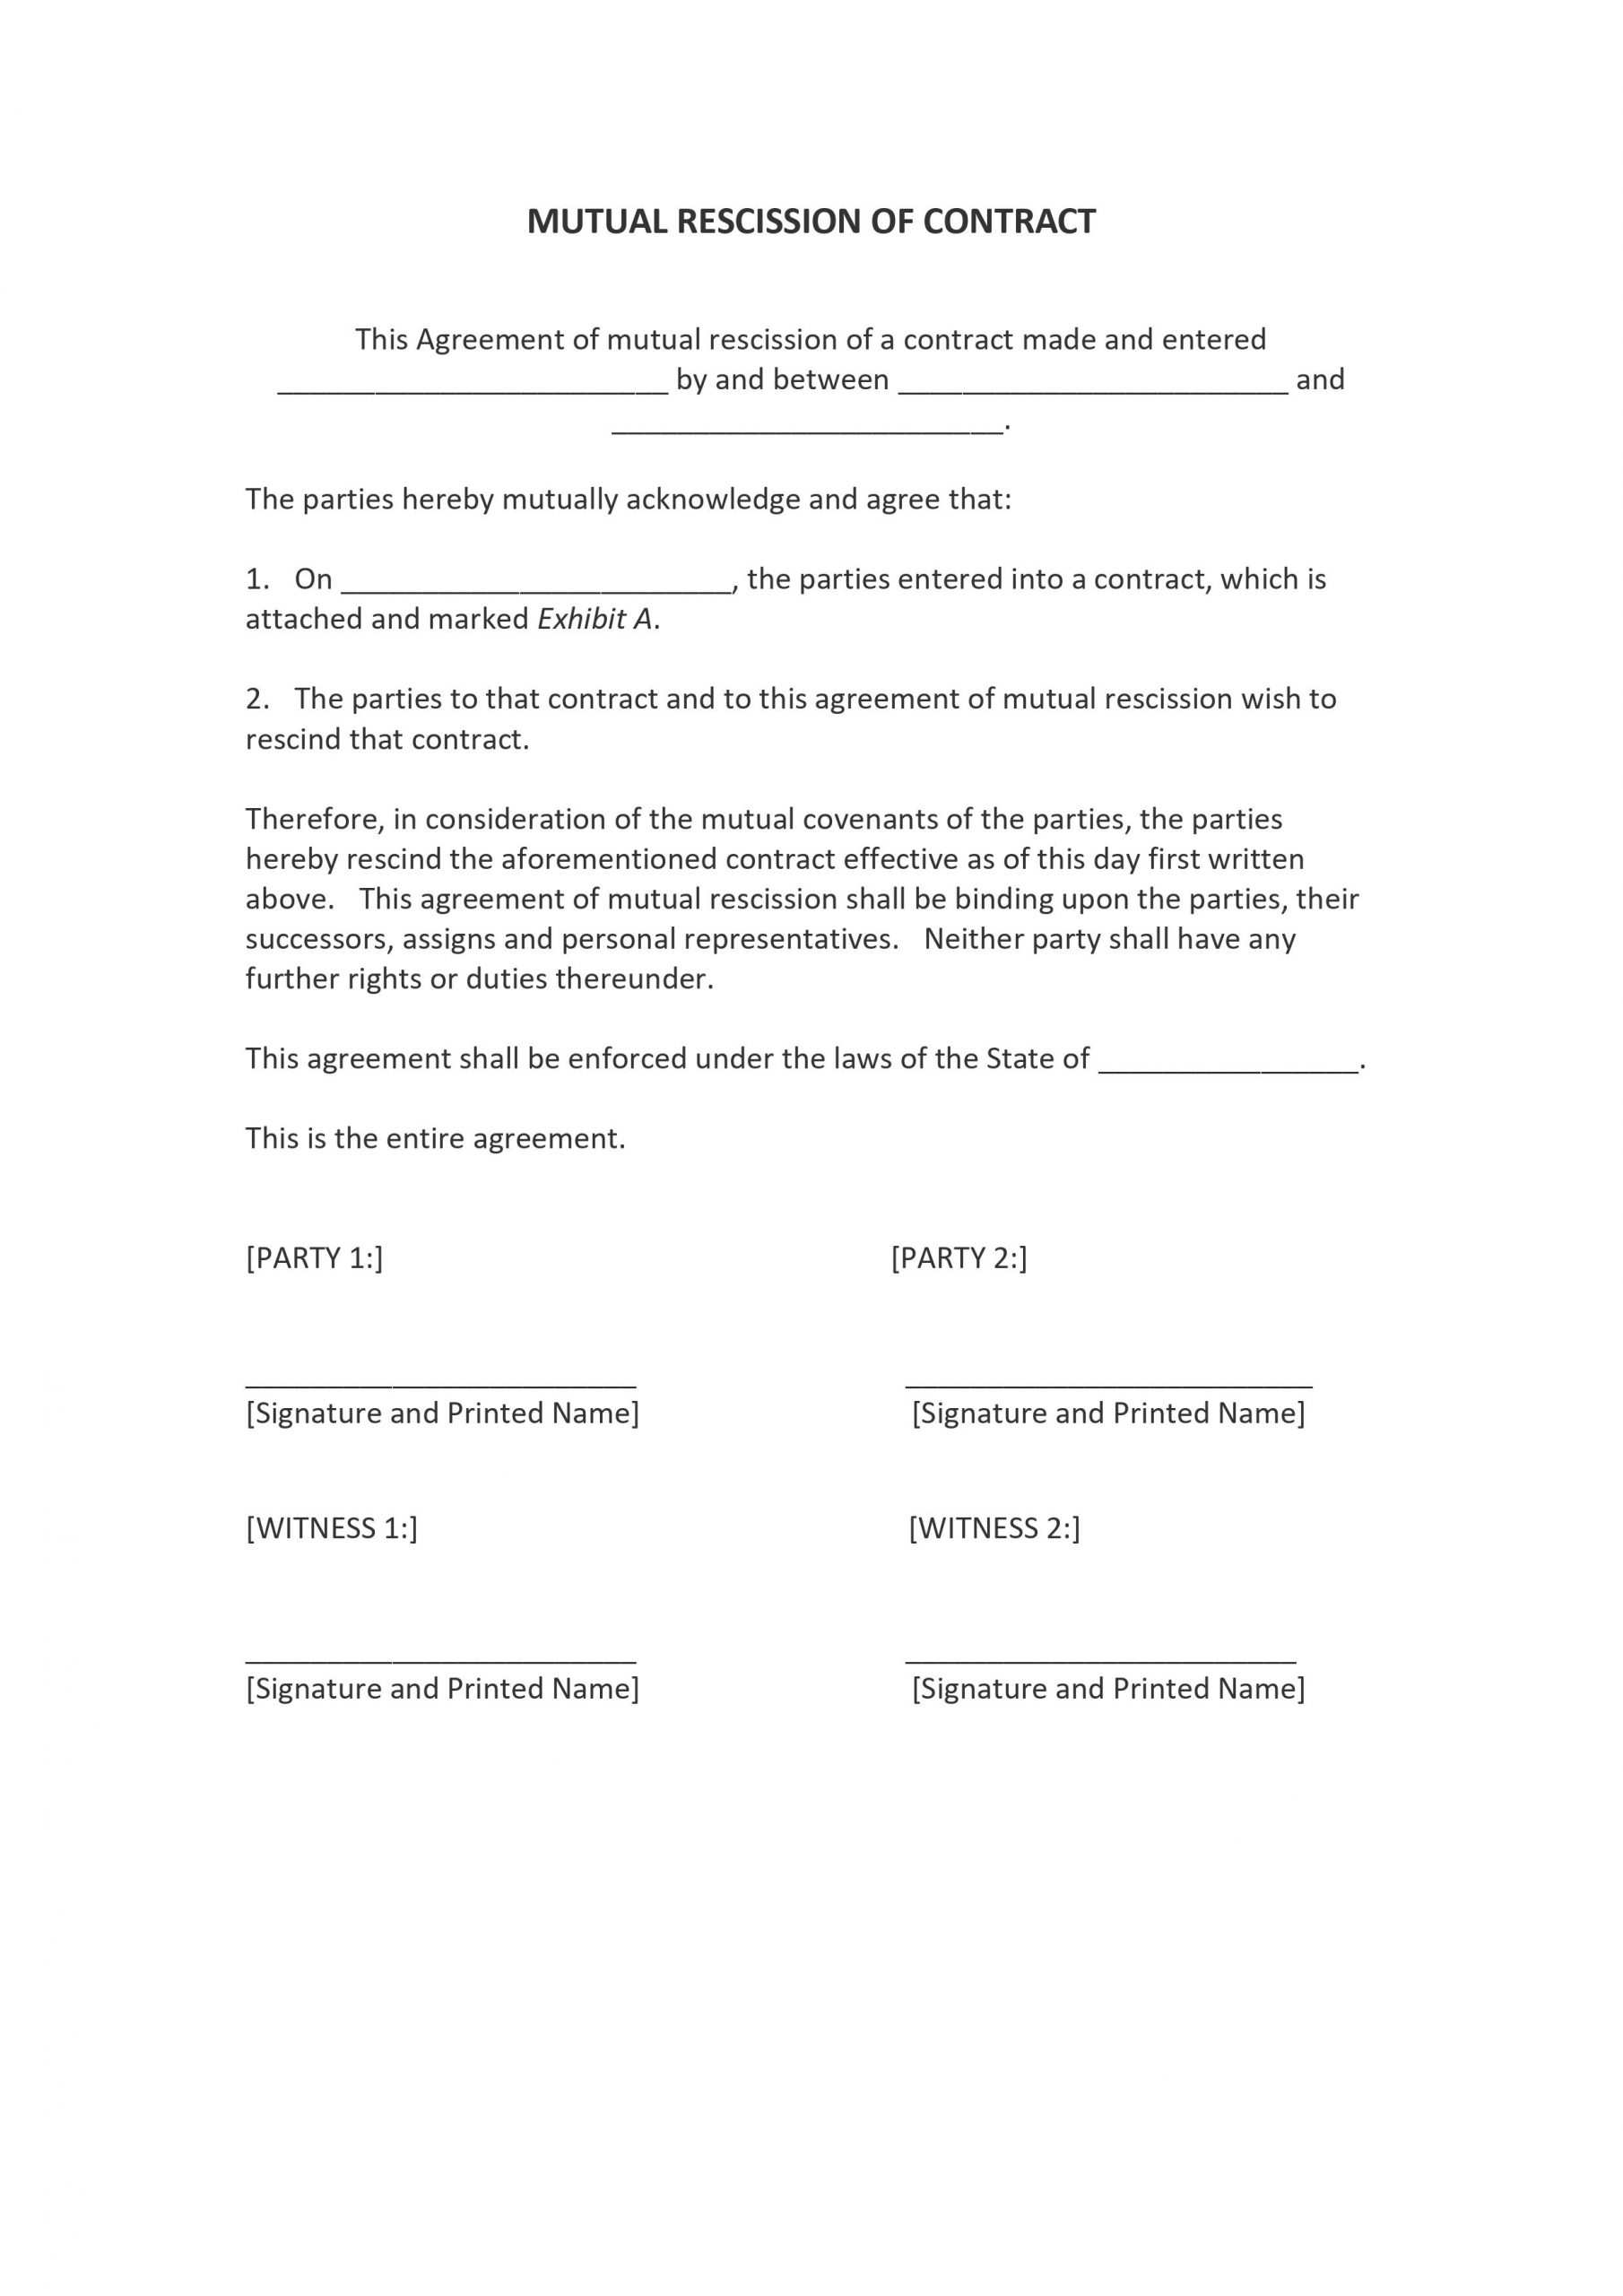 Mutual Rescission and Release Agreement Form